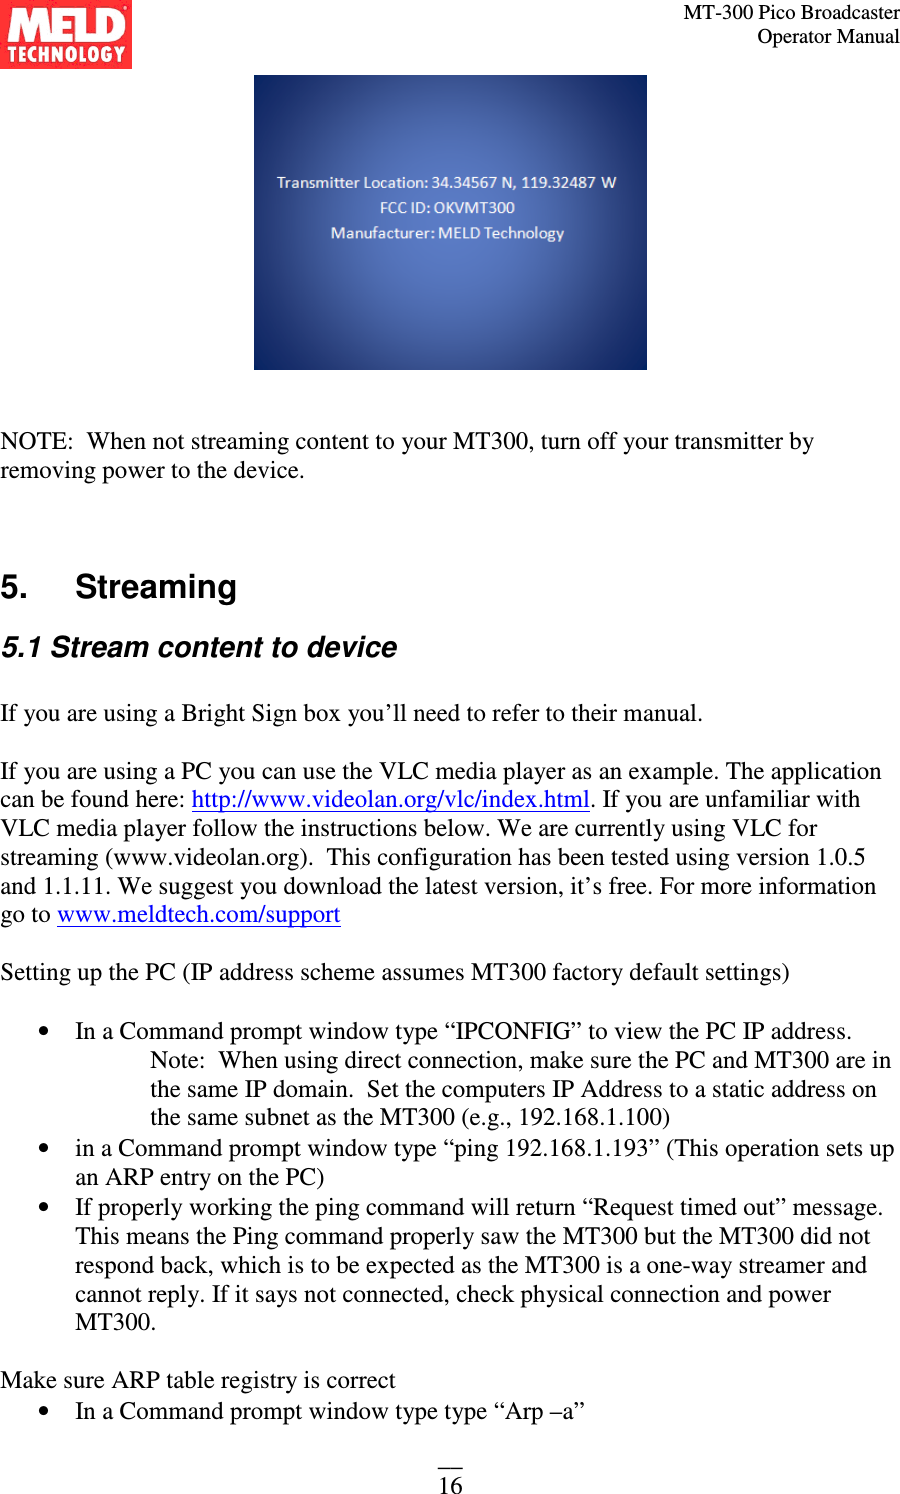 MT-300 Pico Broadcaster                                                                                                                                             Operator Manual __ 16    NOTE:  When not streaming content to your MT300, turn off your transmitter by removing power to the device.     5.   Streaming 5.1 Stream content to device  If you are using a Bright Sign box you’ll need to refer to their manual.  If you are using a PC you can use the VLC media player as an example. The application can be found here: http://www.videolan.org/vlc/index.html. If you are unfamiliar with VLC media player follow the instructions below. We are currently using VLC for streaming (www.videolan.org).  This configuration has been tested using version 1.0.5 and 1.1.11. We suggest you download the latest version, it’s free. For more information go to www.meldtech.com/support  Setting up the PC (IP address scheme assumes MT300 factory default settings)  • In a Command prompt window type “IPCONFIG” to view the PC IP address.  Note:  When using direct connection, make sure the PC and MT300 are in the same IP domain.  Set the computers IP Address to a static address on the same subnet as the MT300 (e.g., 192.168.1.100) • in a Command prompt window type “ping 192.168.1.193” (This operation sets up an ARP entry on the PC) • If properly working the ping command will return “Request timed out” message.  This means the Ping command properly saw the MT300 but the MT300 did not respond back, which is to be expected as the MT300 is a one-way streamer and cannot reply. If it says not connected, check physical connection and power MT300.    Make sure ARP table registry is correct • In a Command prompt window type type “Arp –a” 